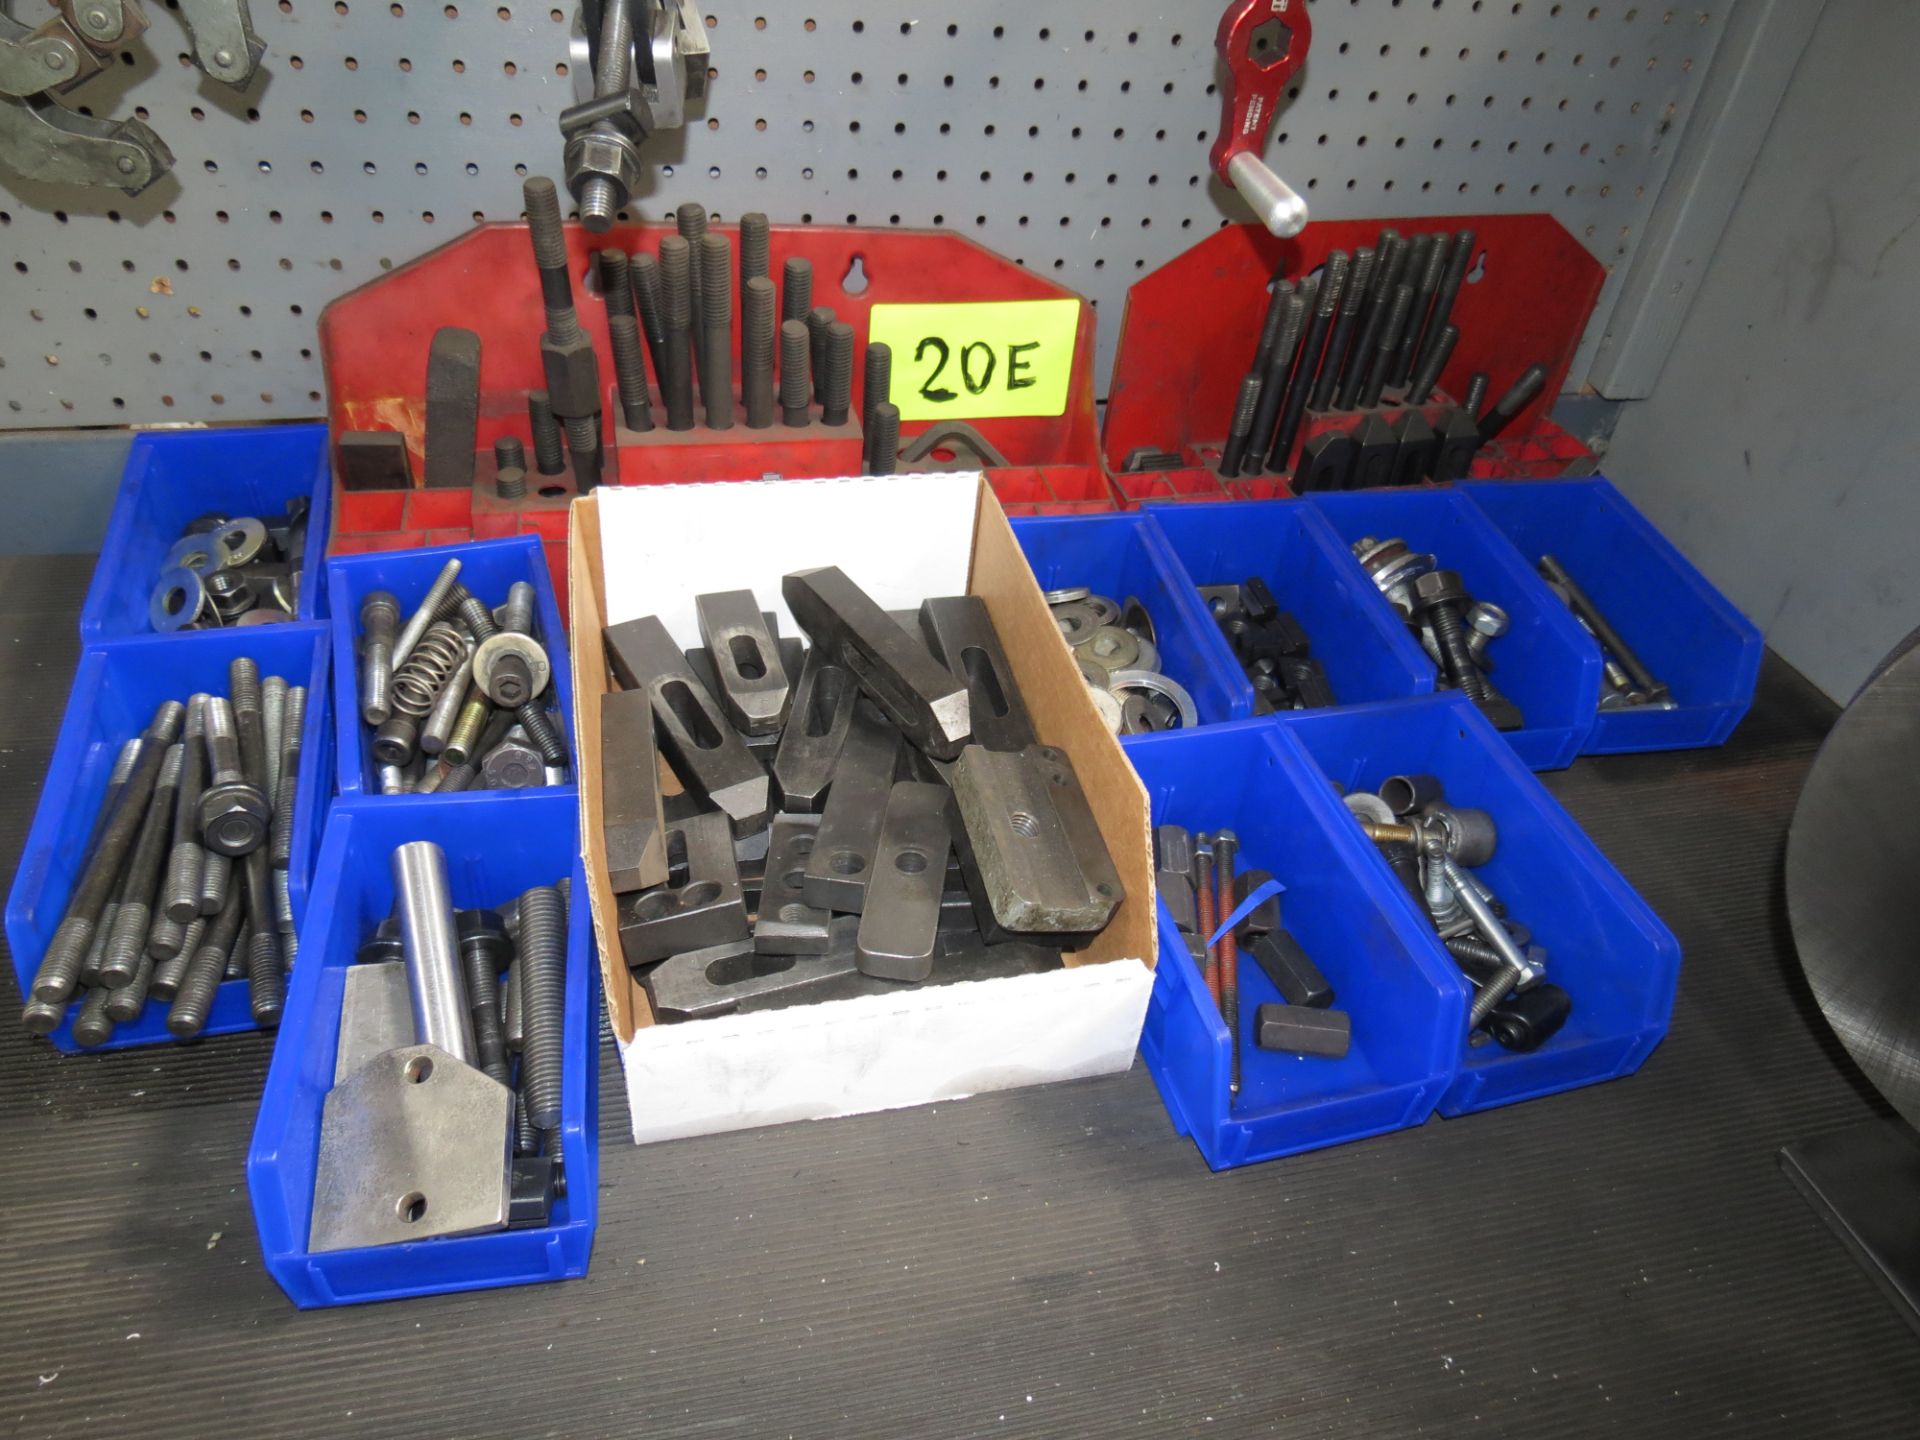 LOT OF HOLD DOWN NUTS, WASHERS & BOLTS FOR MILLING MACHINE